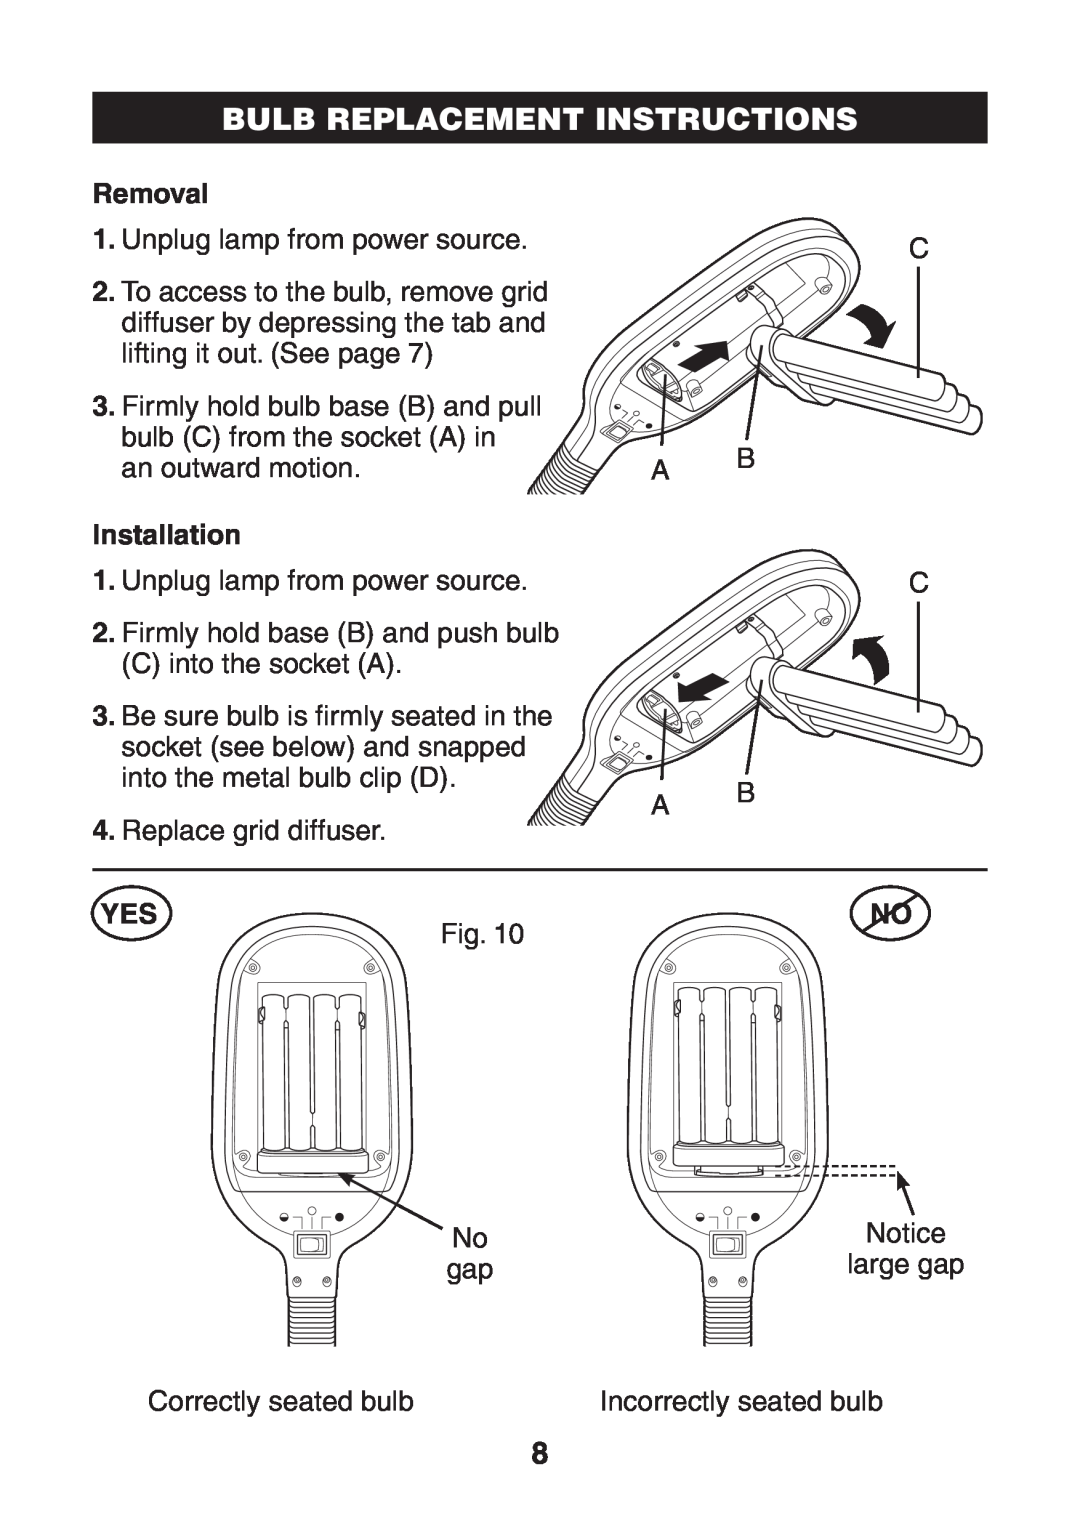 Verilux VF01 manual Bulb Replacement Instructions, Removal, Installation 